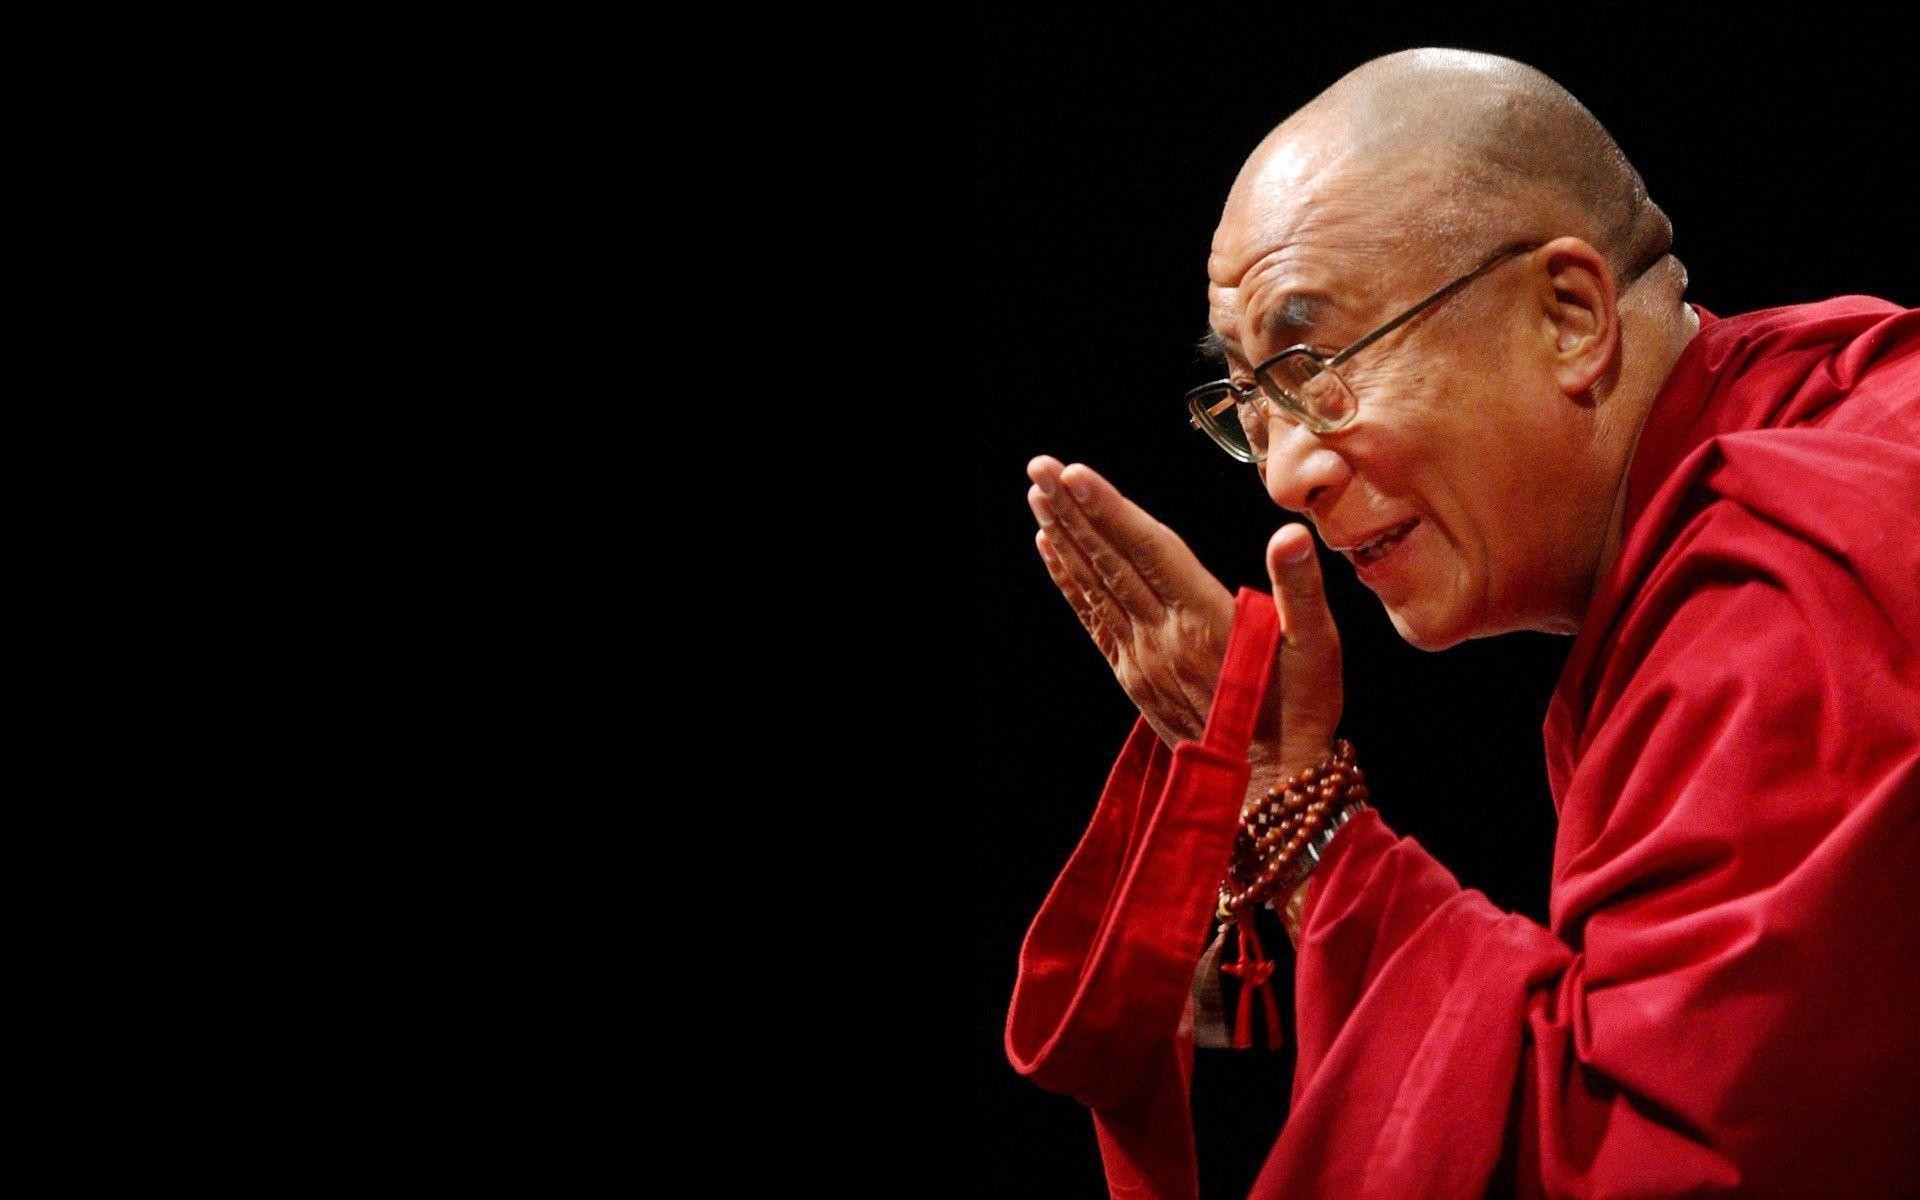 1920x1200 Dalai Lama #1155643 - People Images & Wallpapers on Jeweell